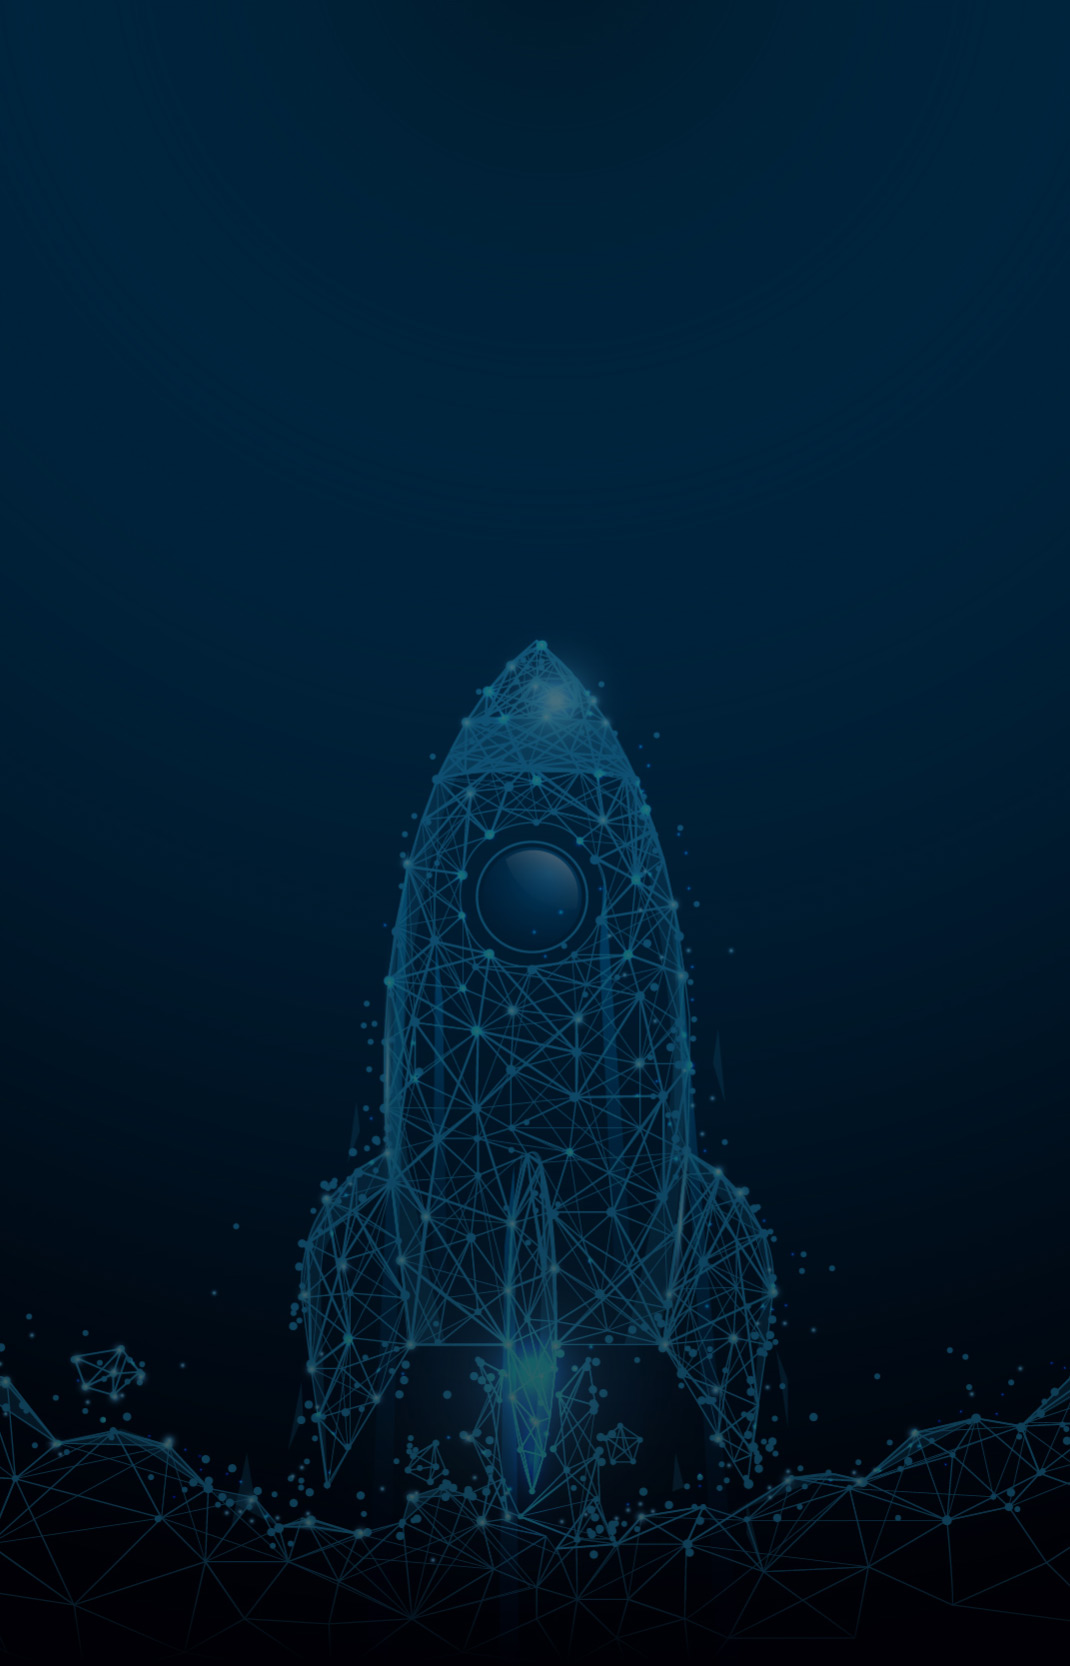 a graphic of a rocket made up of points and lines on a dark blue background